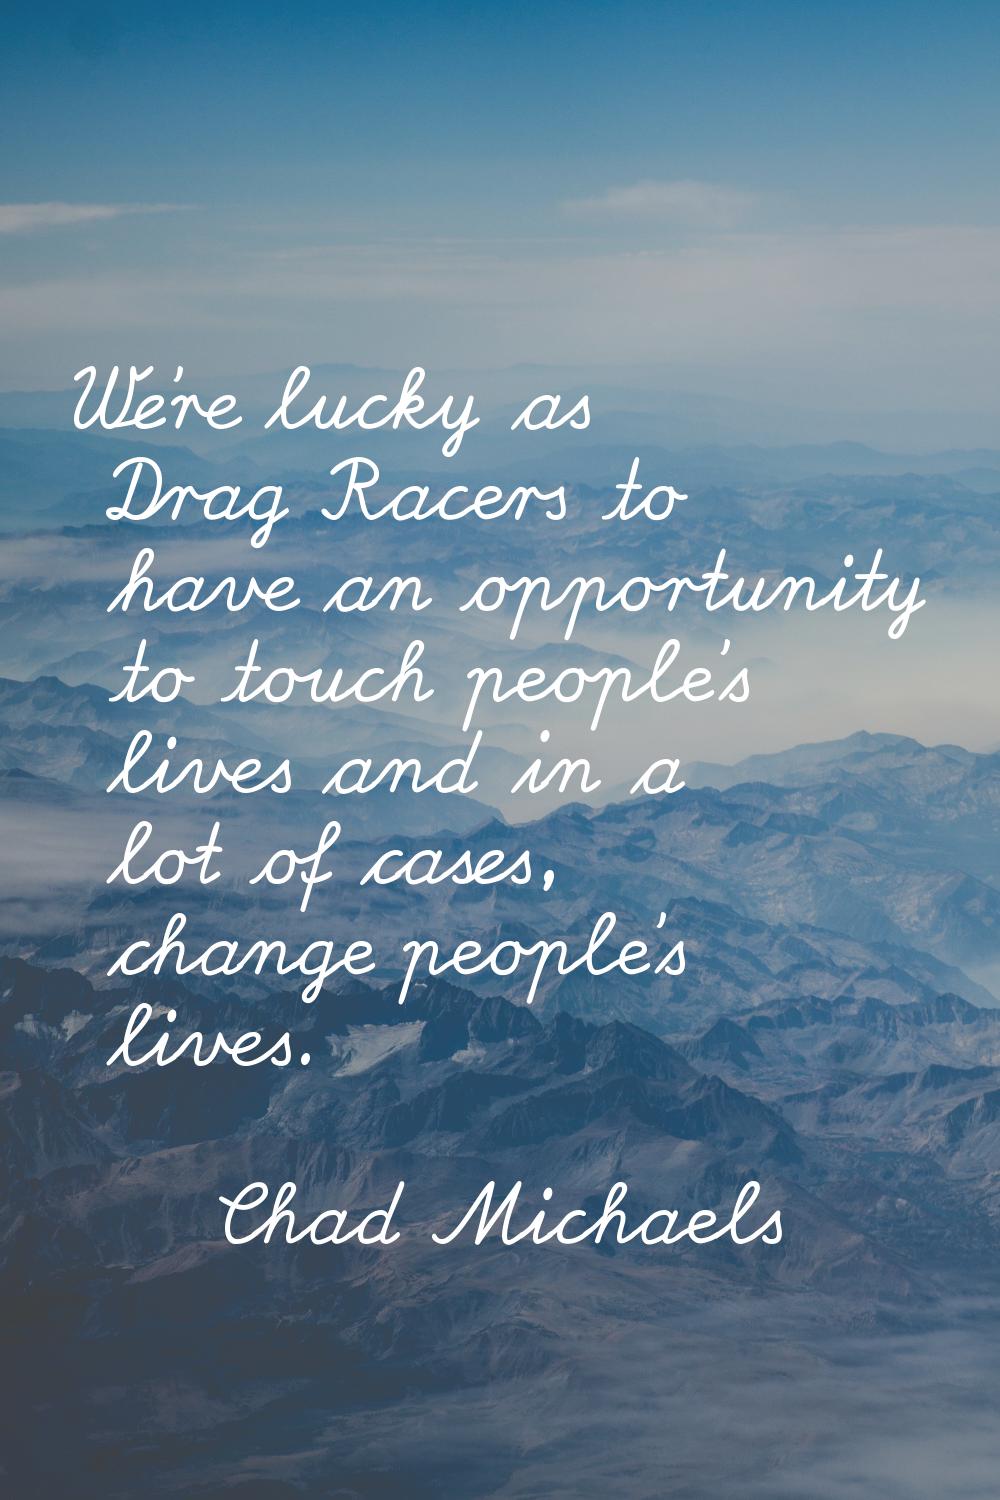 We're lucky as Drag Racers to have an opportunity to touch people's lives and in a lot of cases, ch